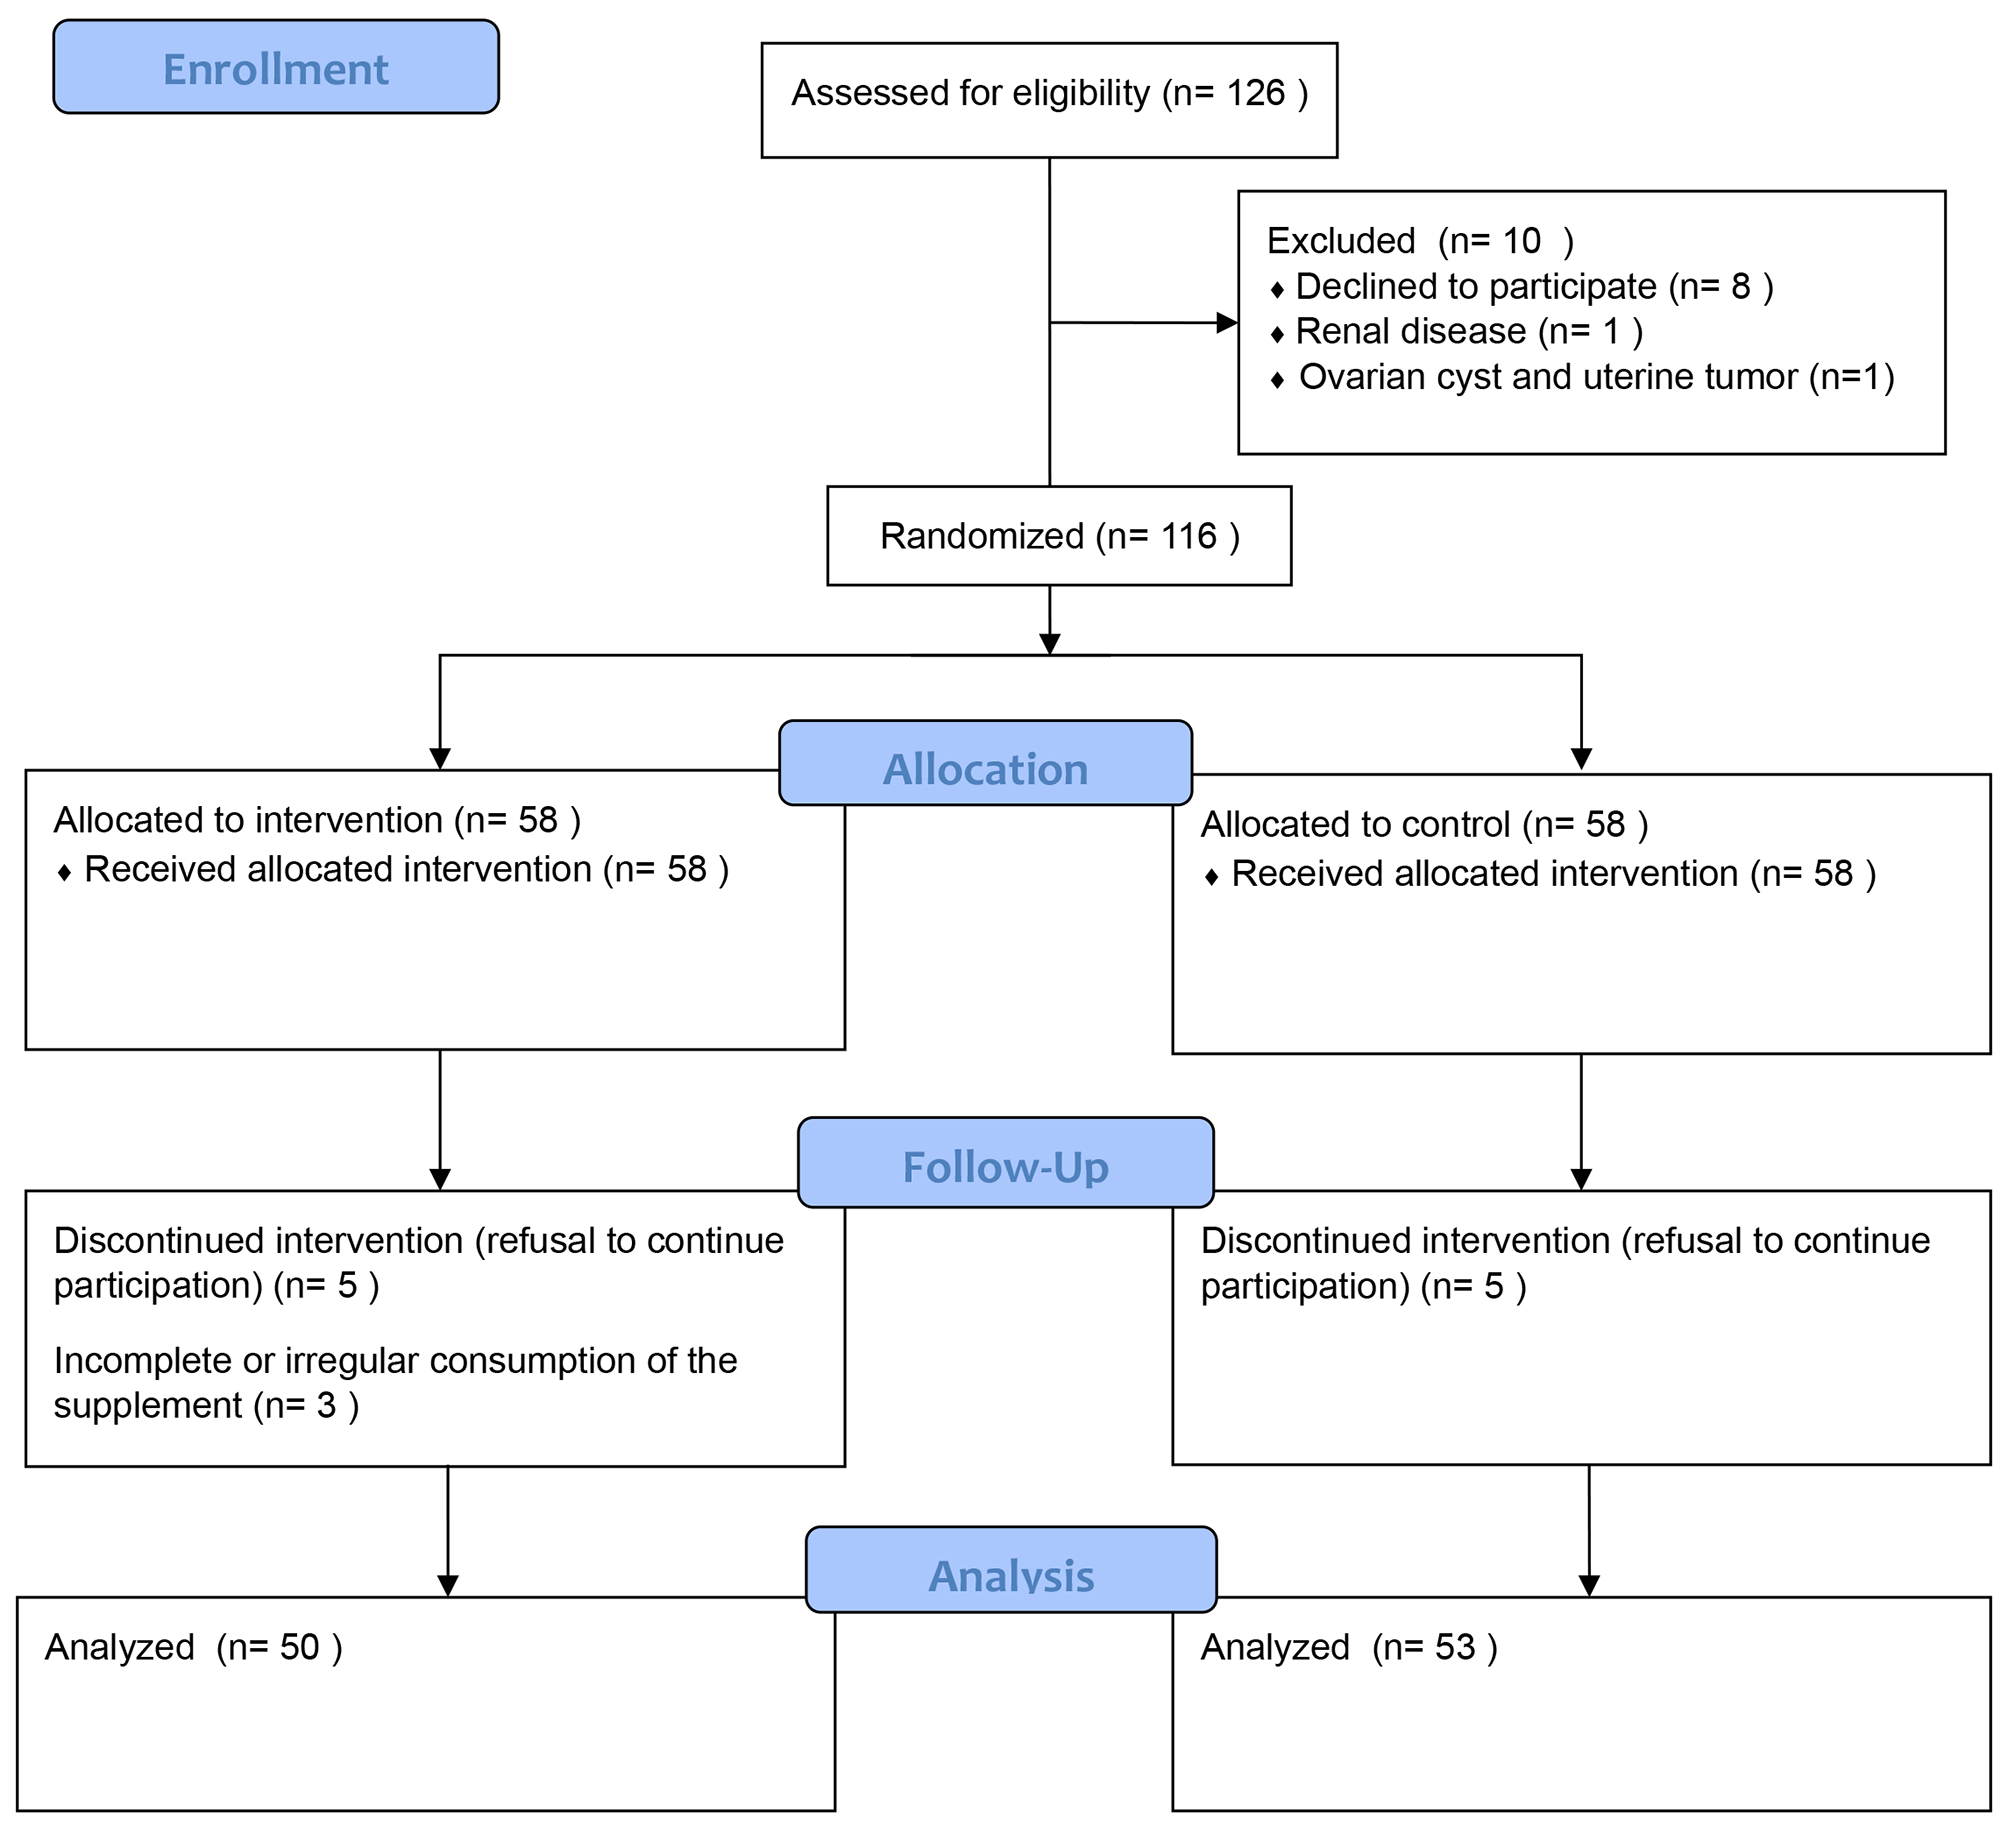 The possible short-term of Nigella sativa – L in the management of adolescent polycystic ovarian syndrome: results of a randomized controlled trial